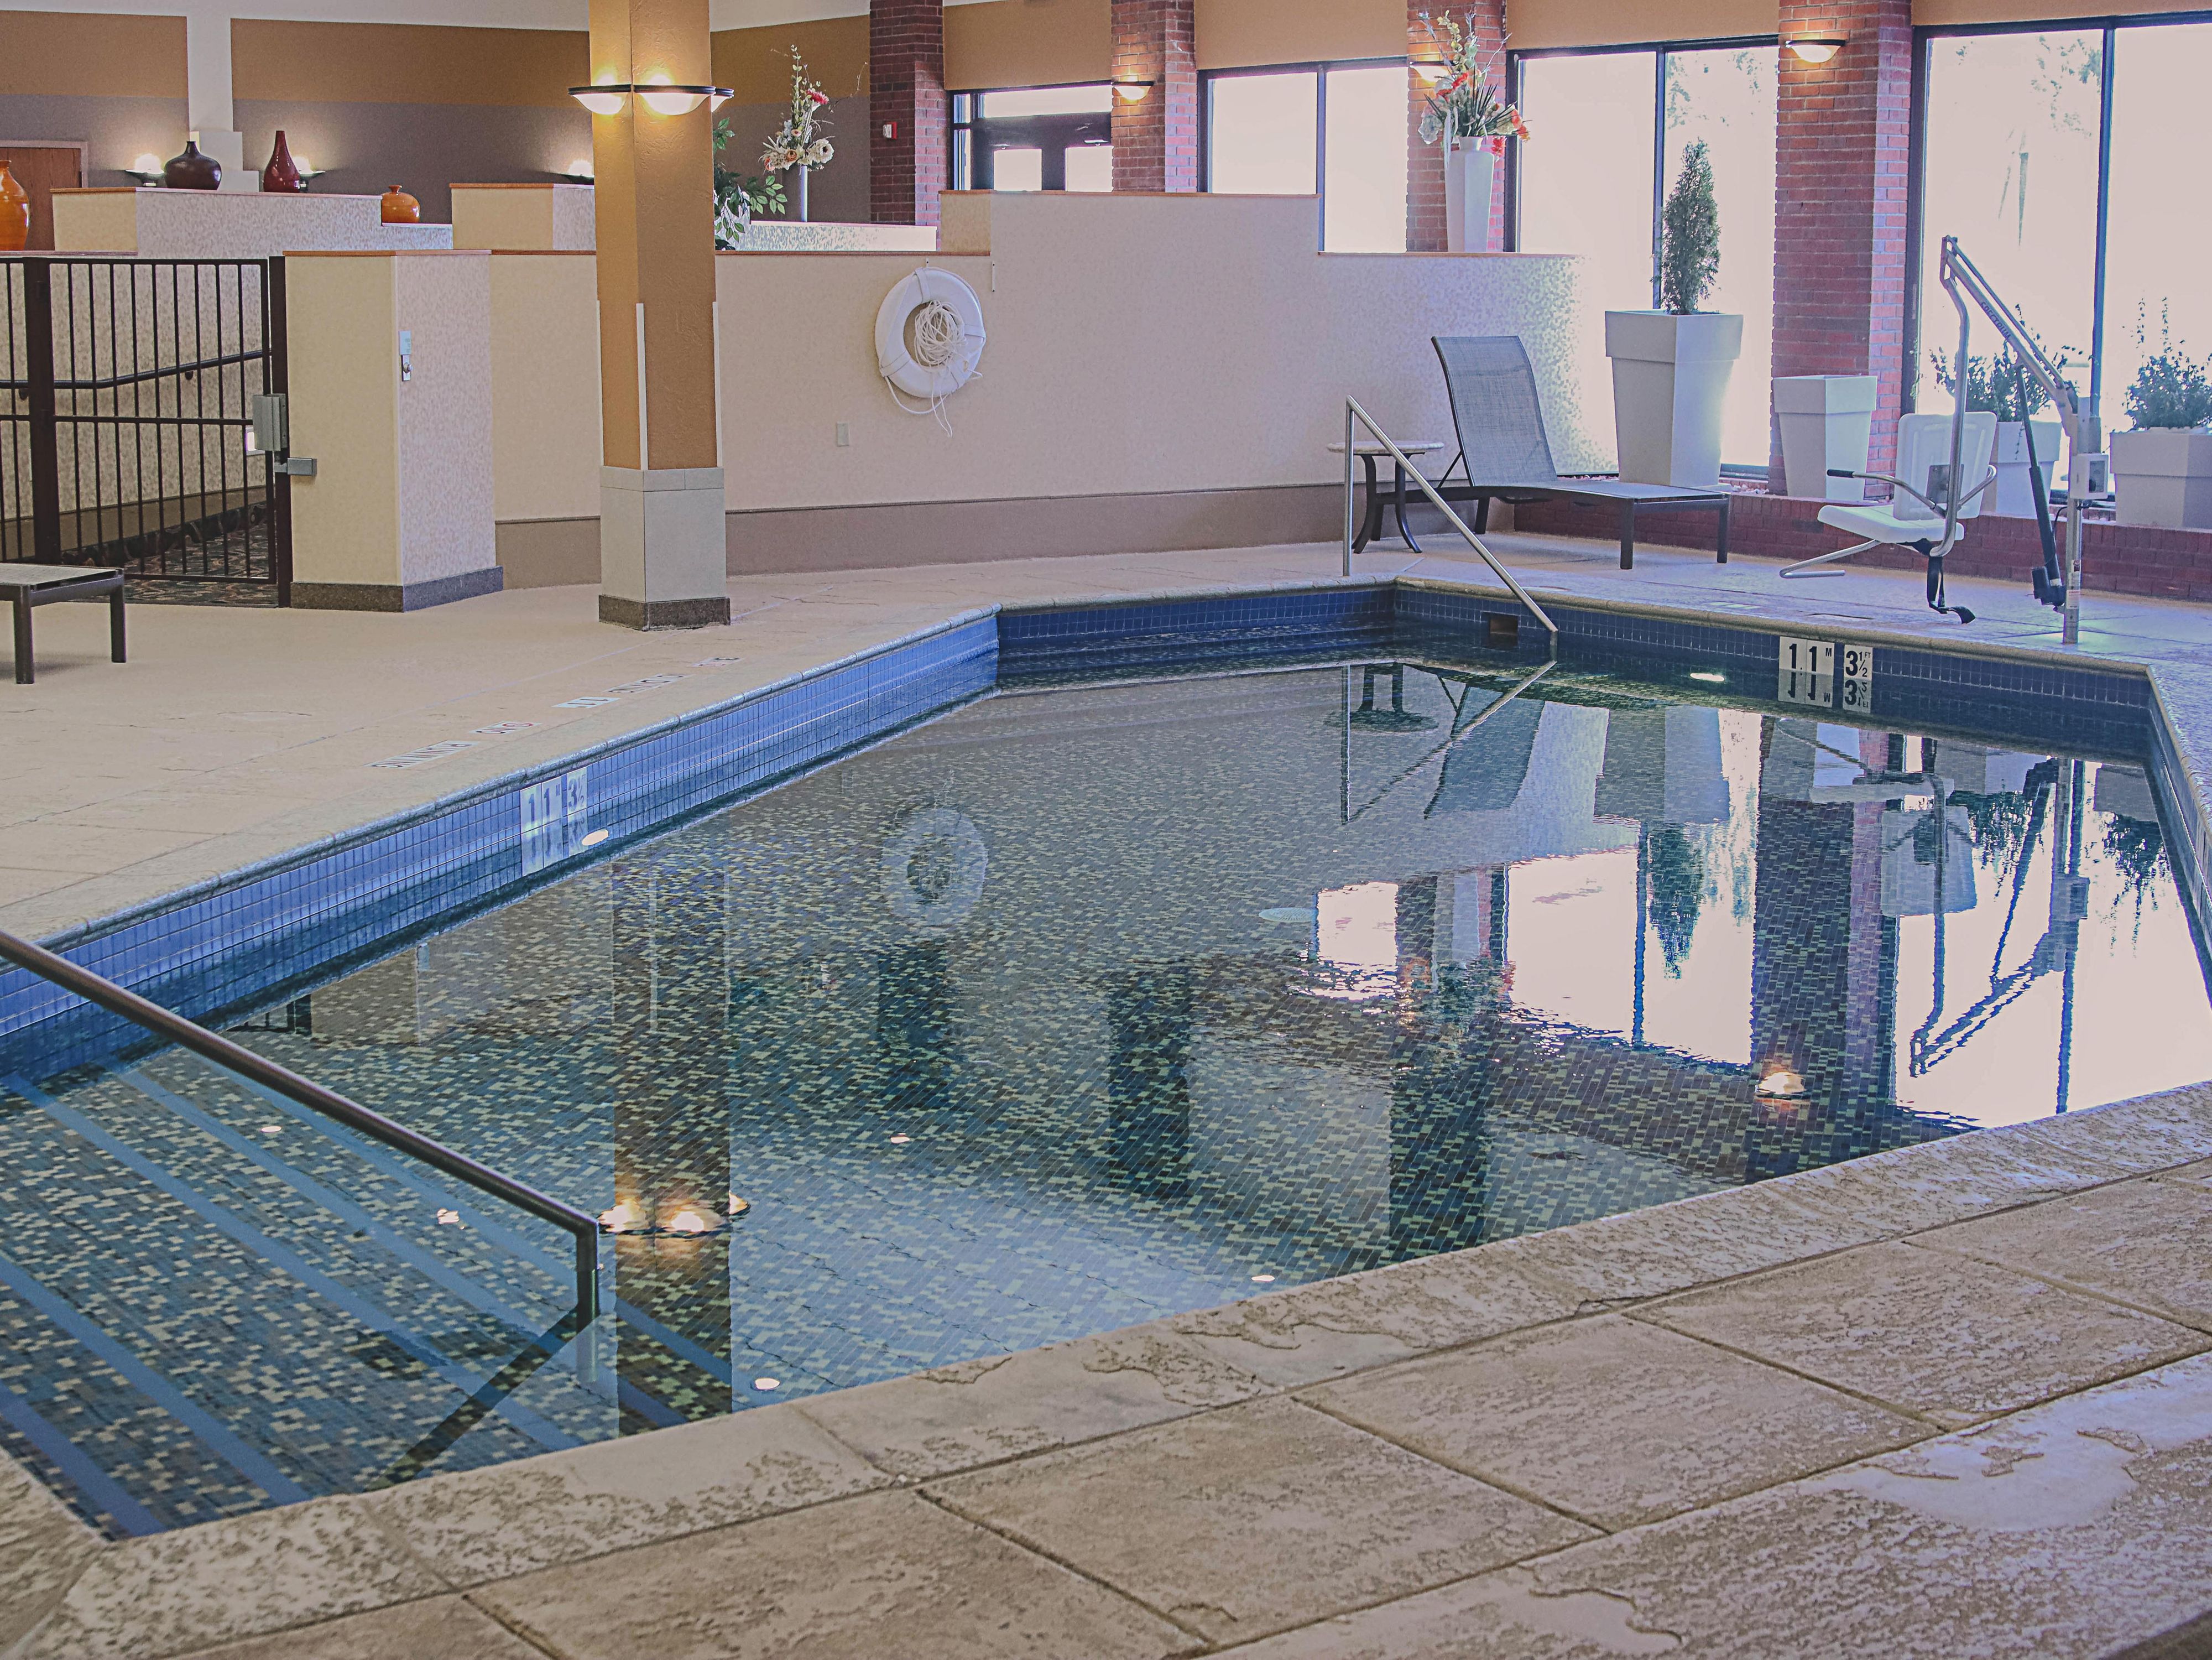 Take some time to enjoy our indoor heated pool. Open daily from 6am until 10pm.